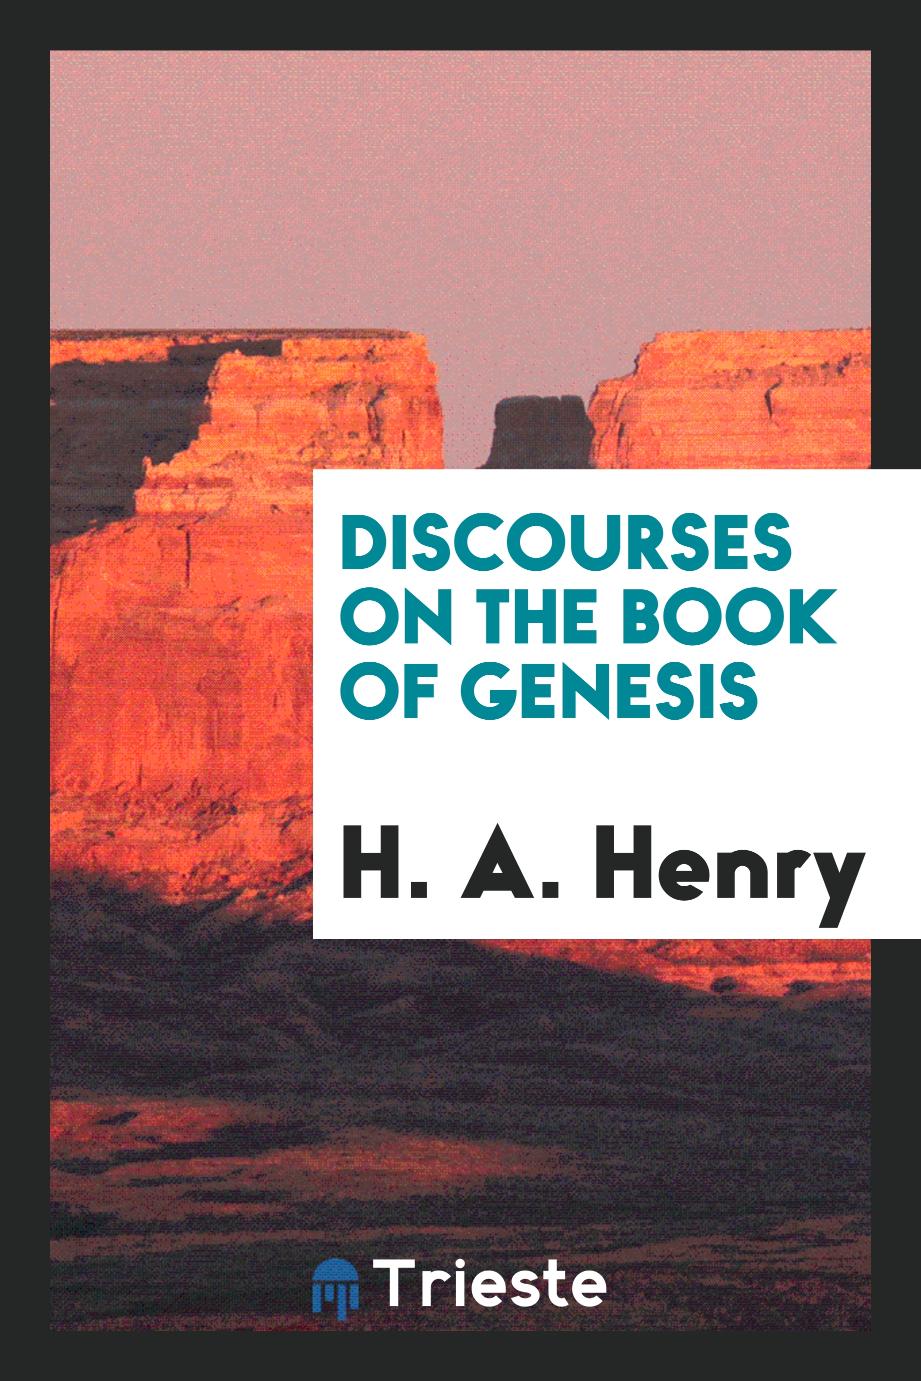 Discourses on the book of Genesis